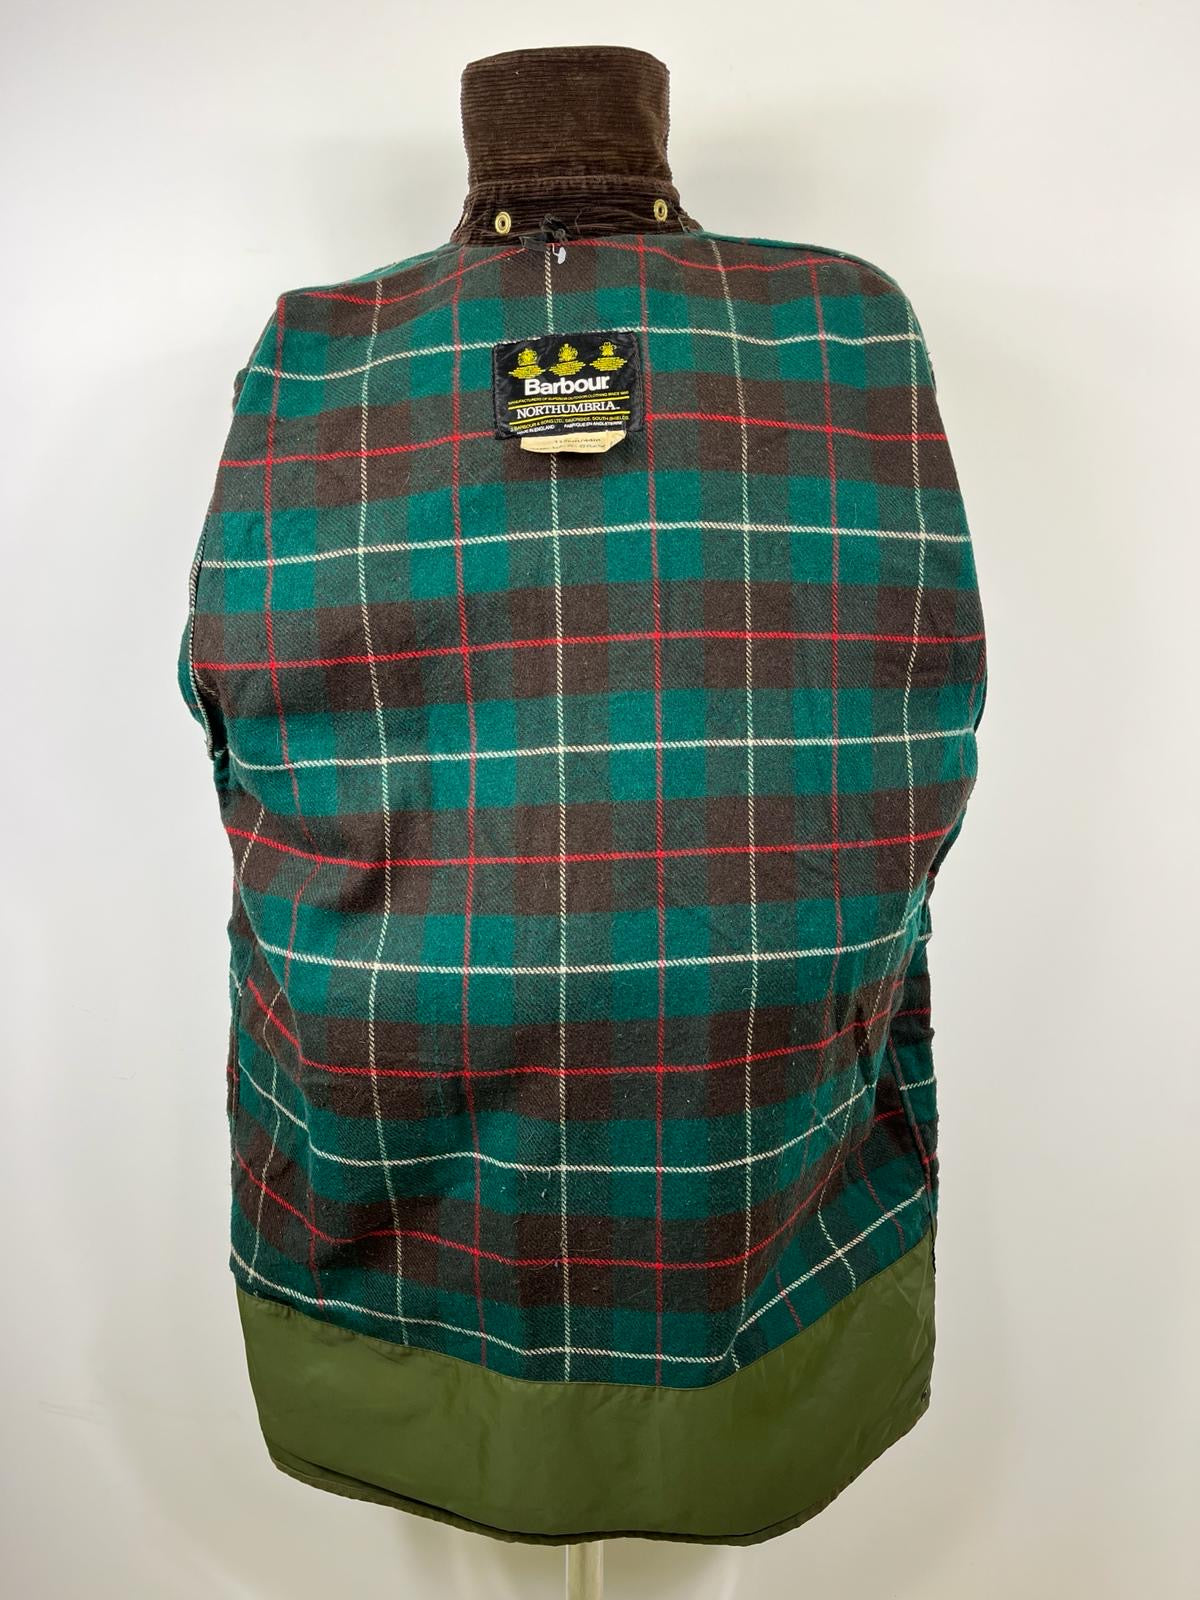 Giacca Barbour Vintage Northumbria C44/112cm-Green Northumbria Wax Jacket L/XL